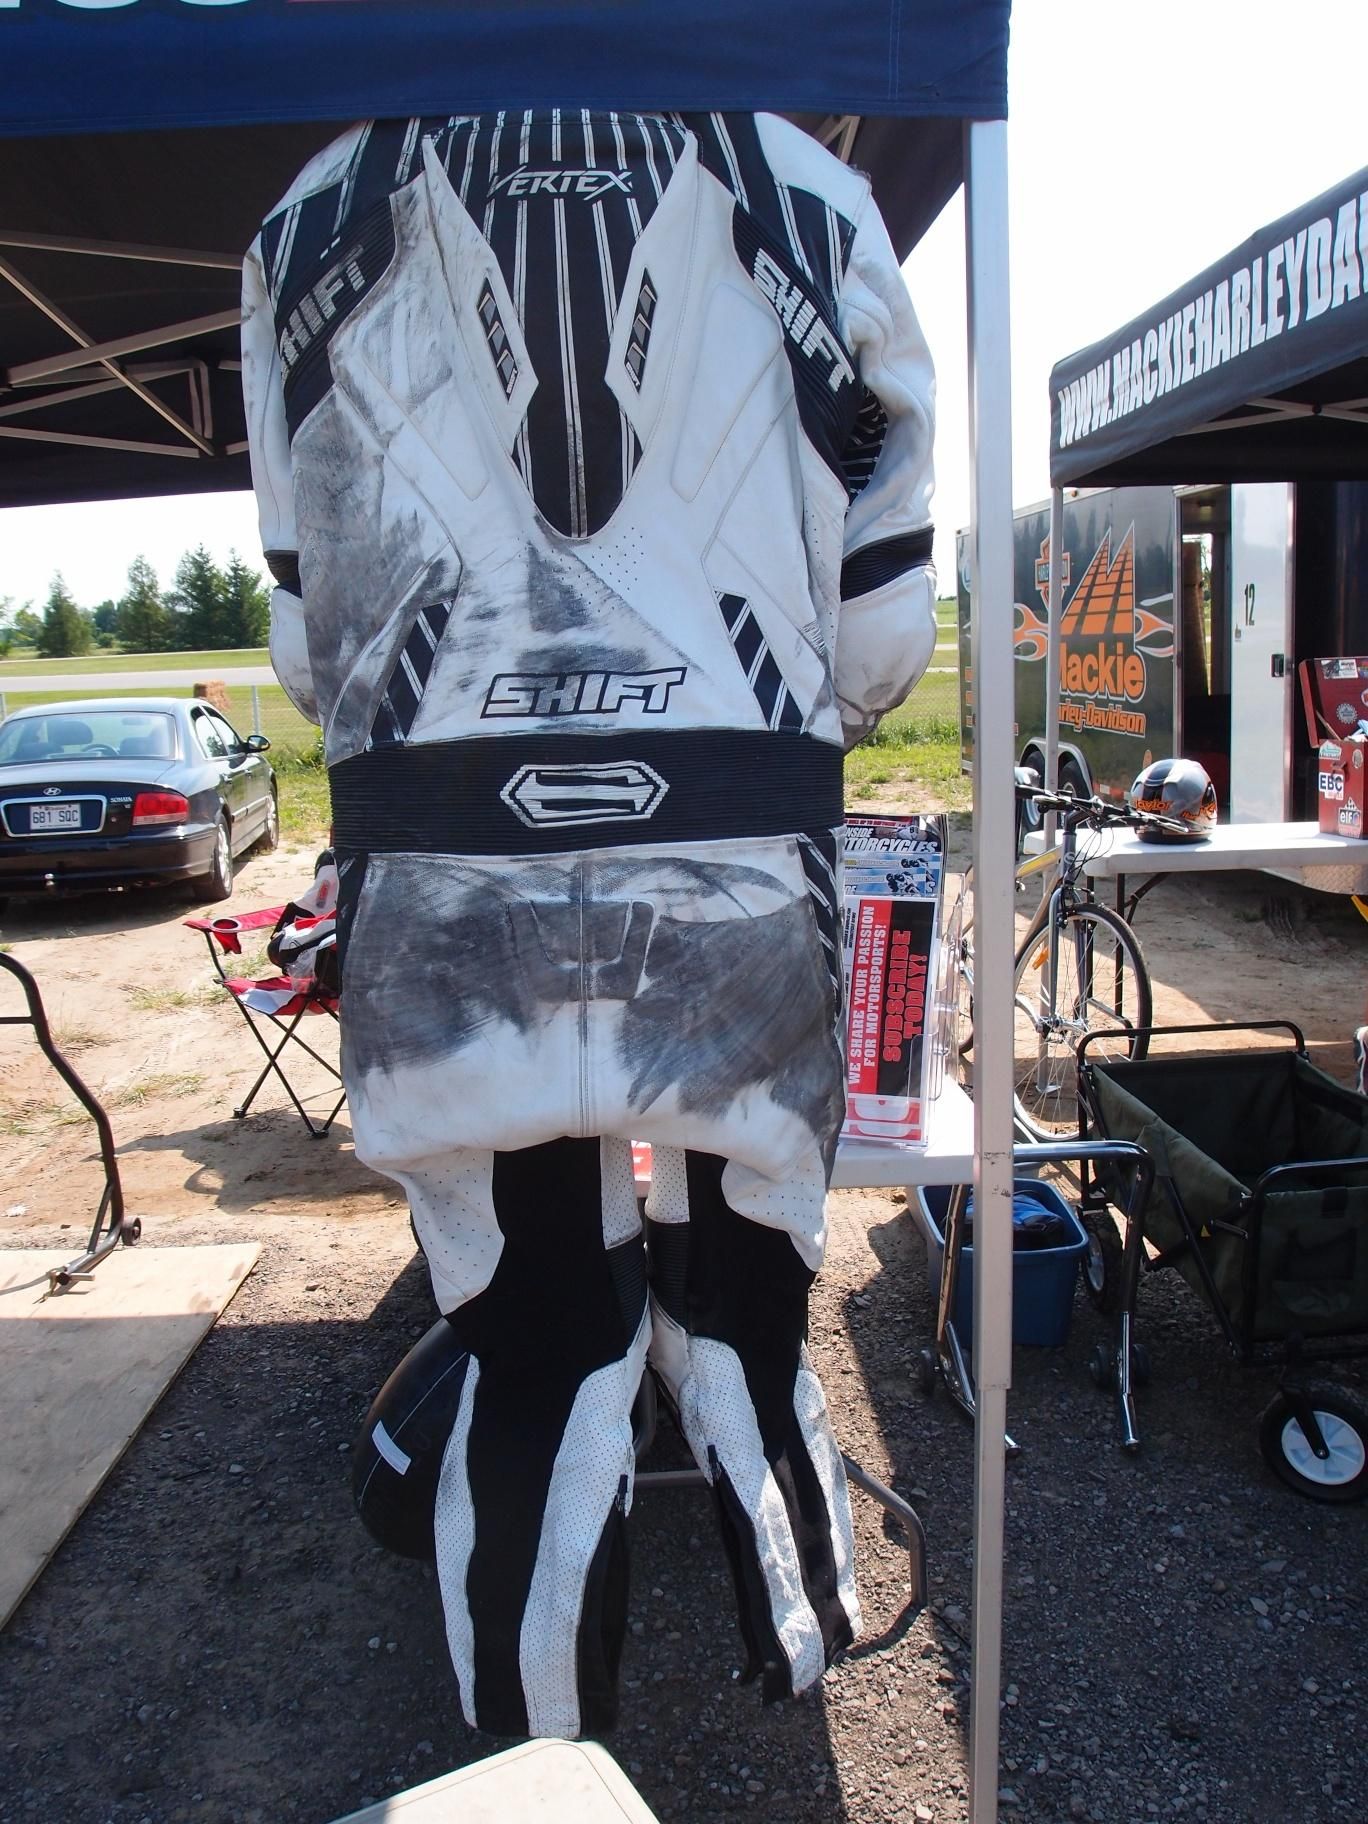 Very well used leathers #csbk